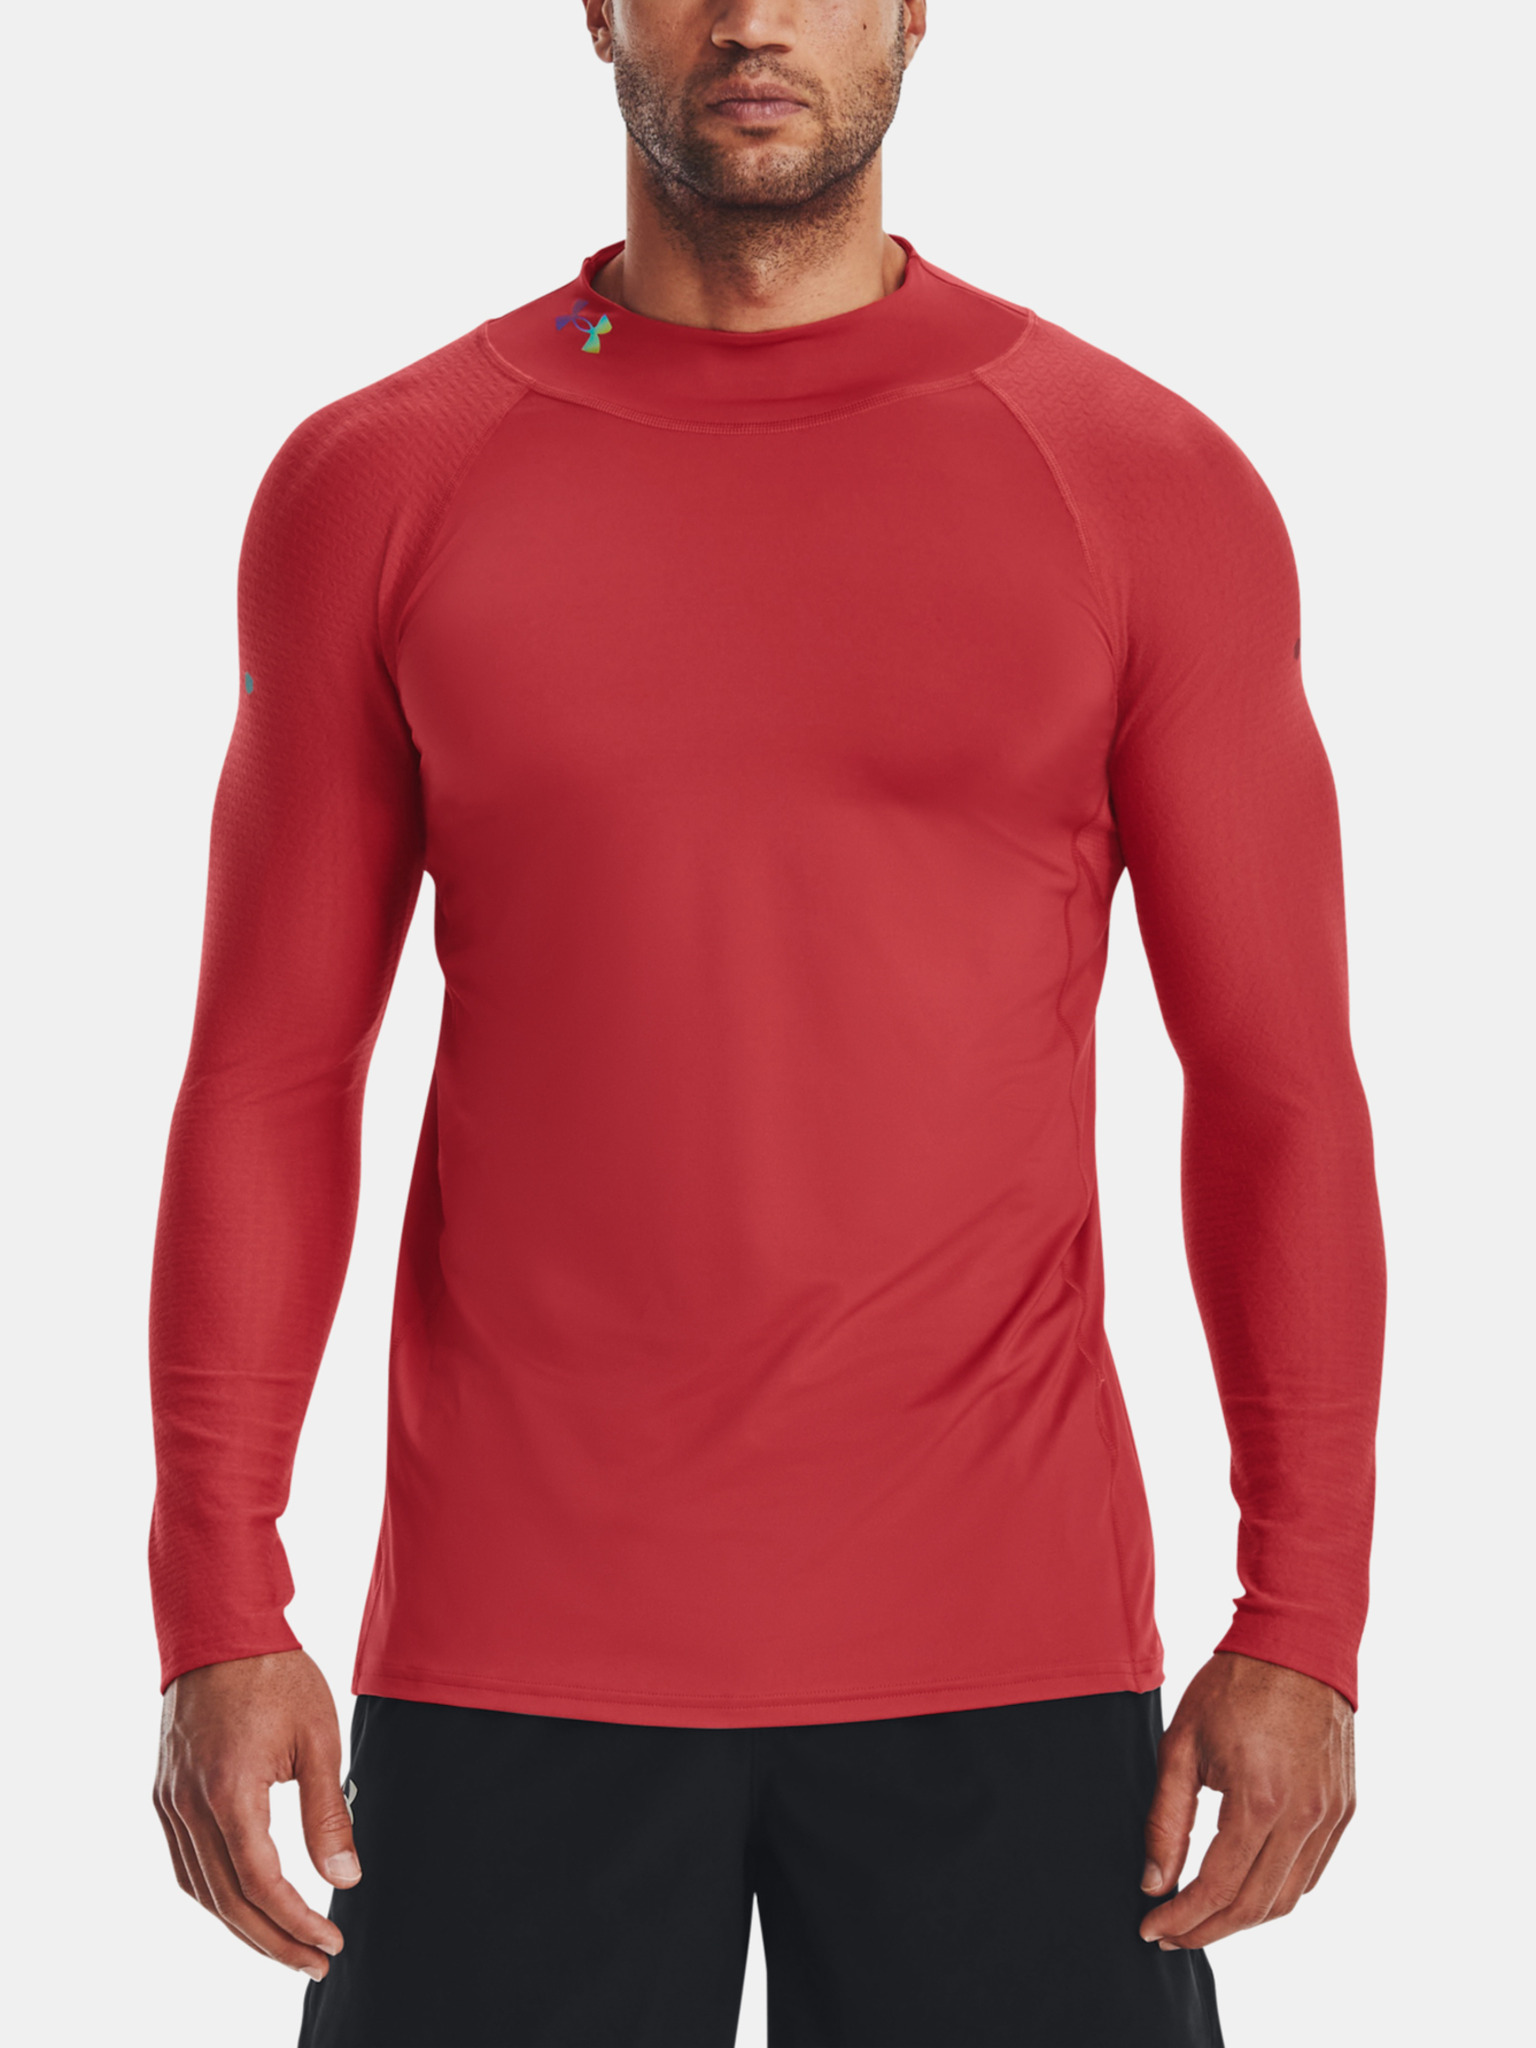 Under Armour Men's Armour Long-Sleeve Compression Shirt